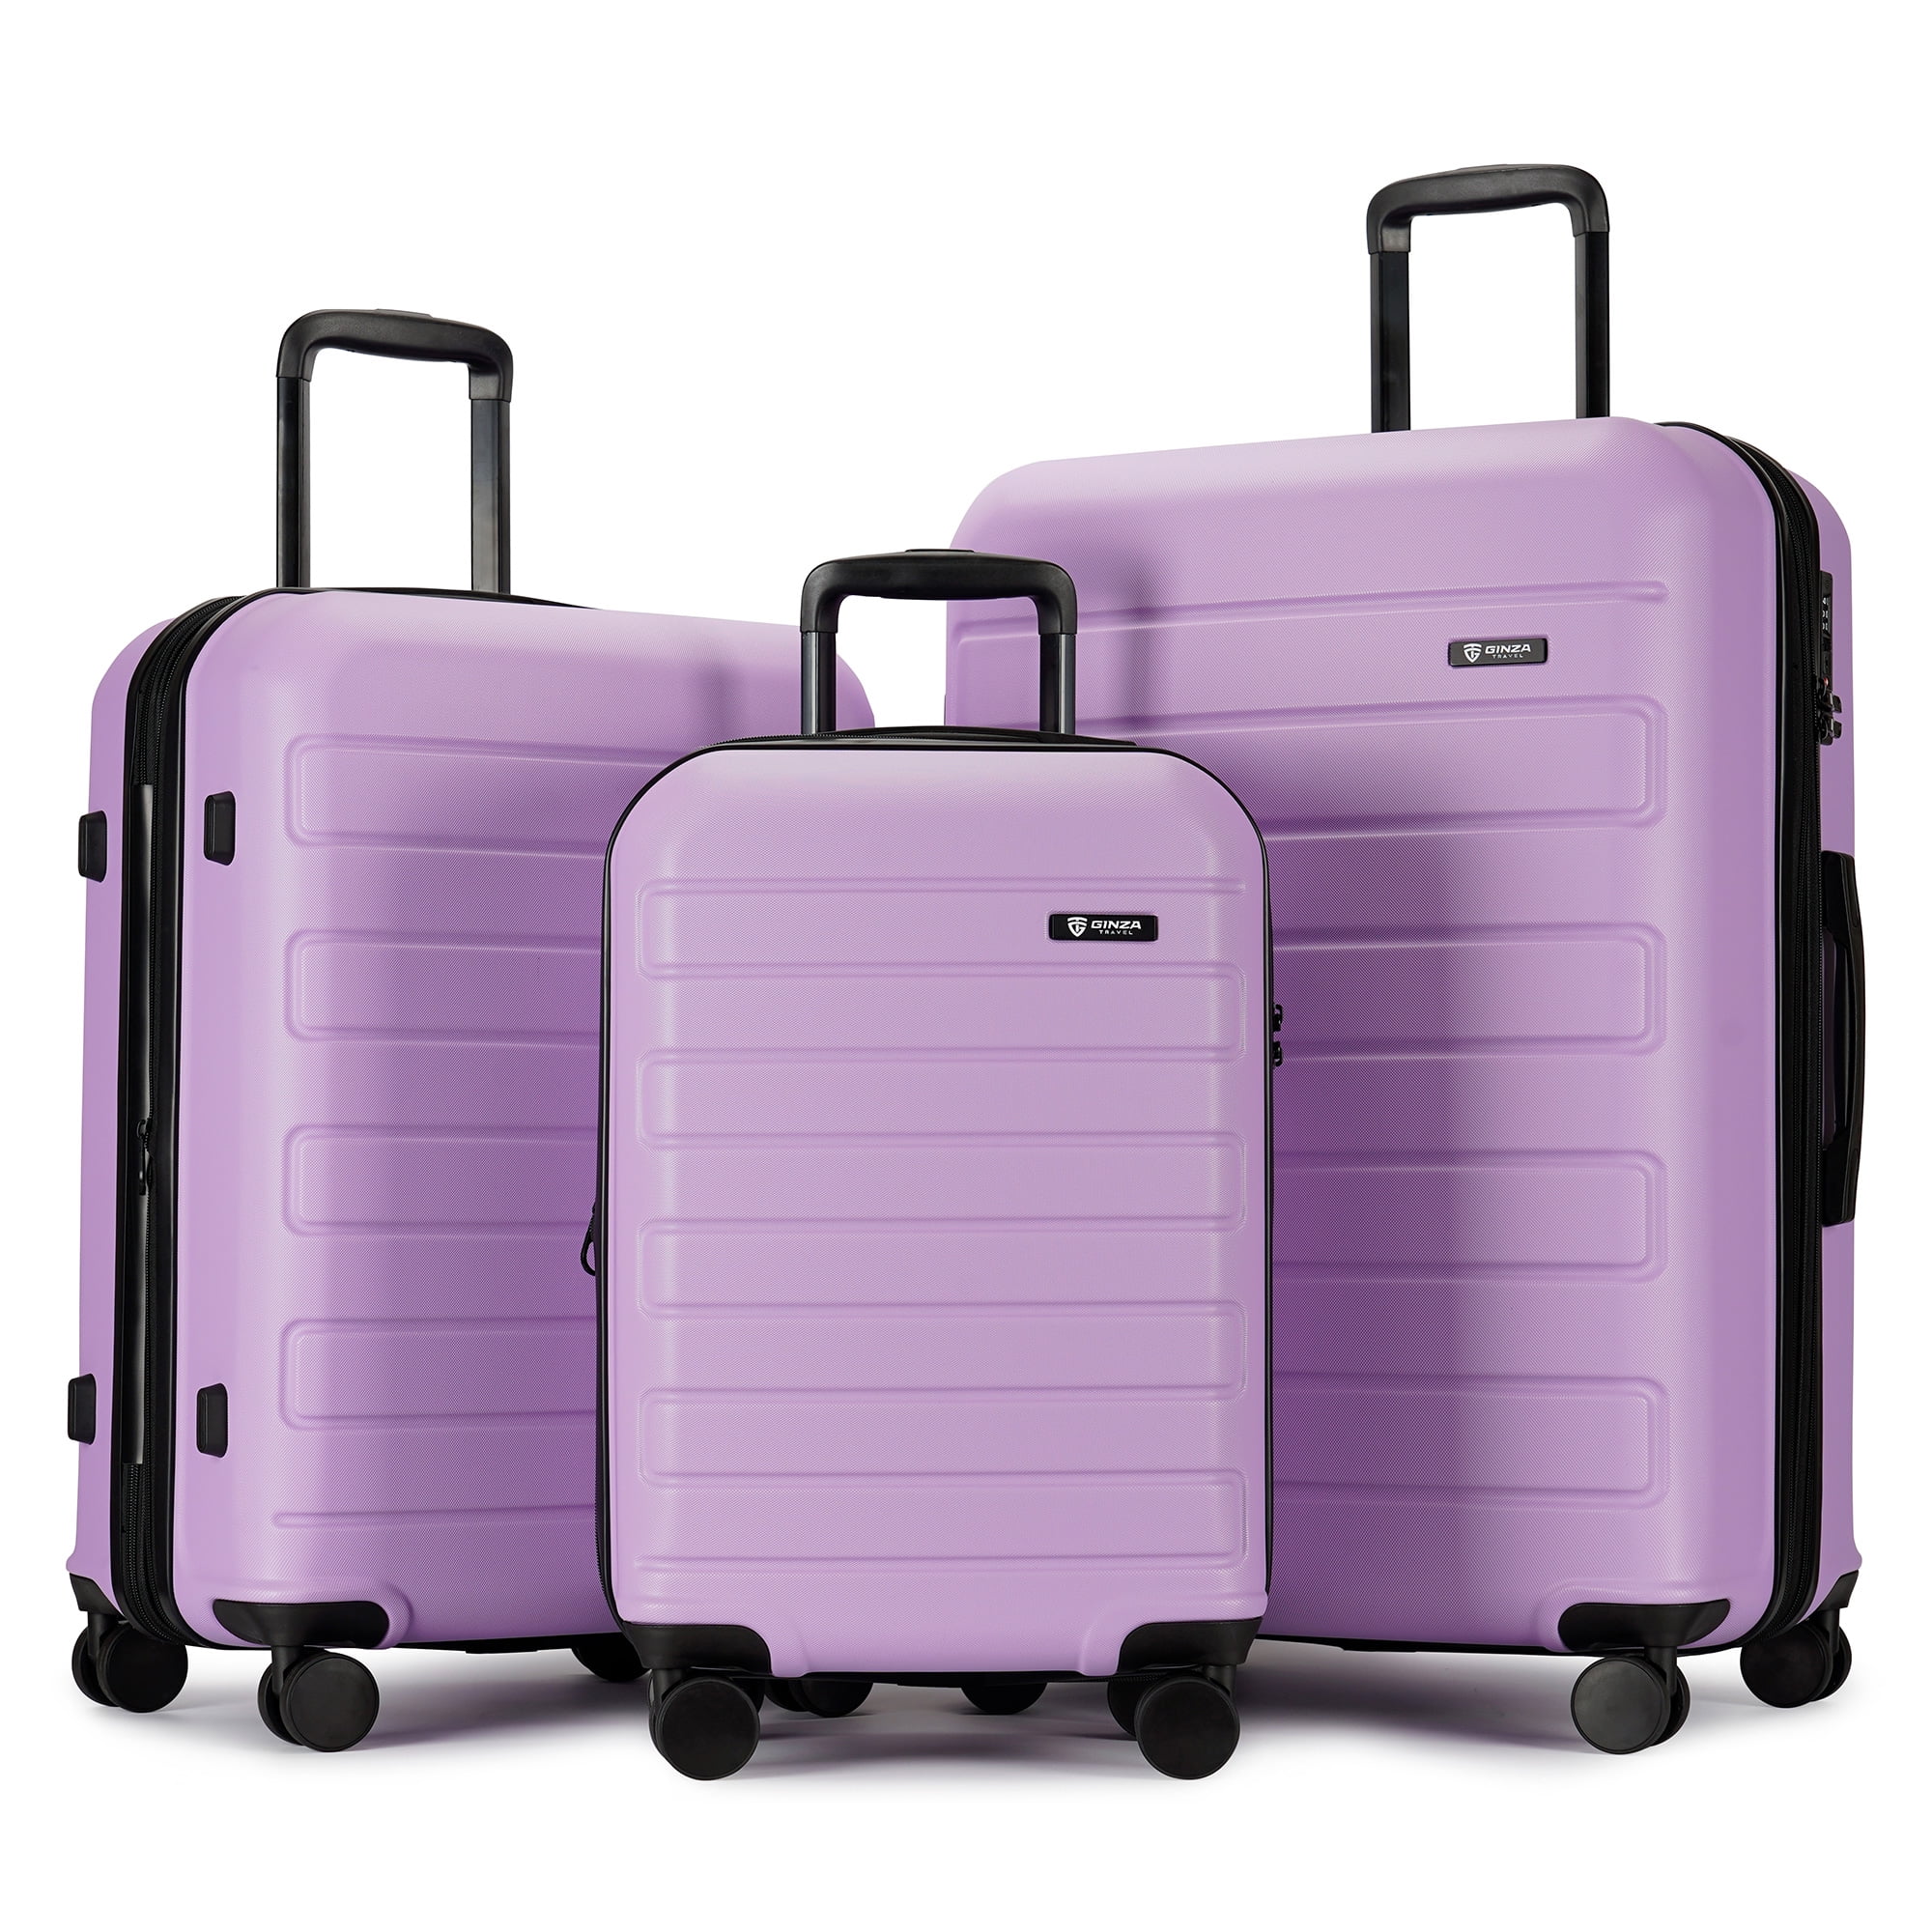 Ginza Travel 3 Piece Luggage Sets,Expandable ABS Hard Shell Luggage Set ...